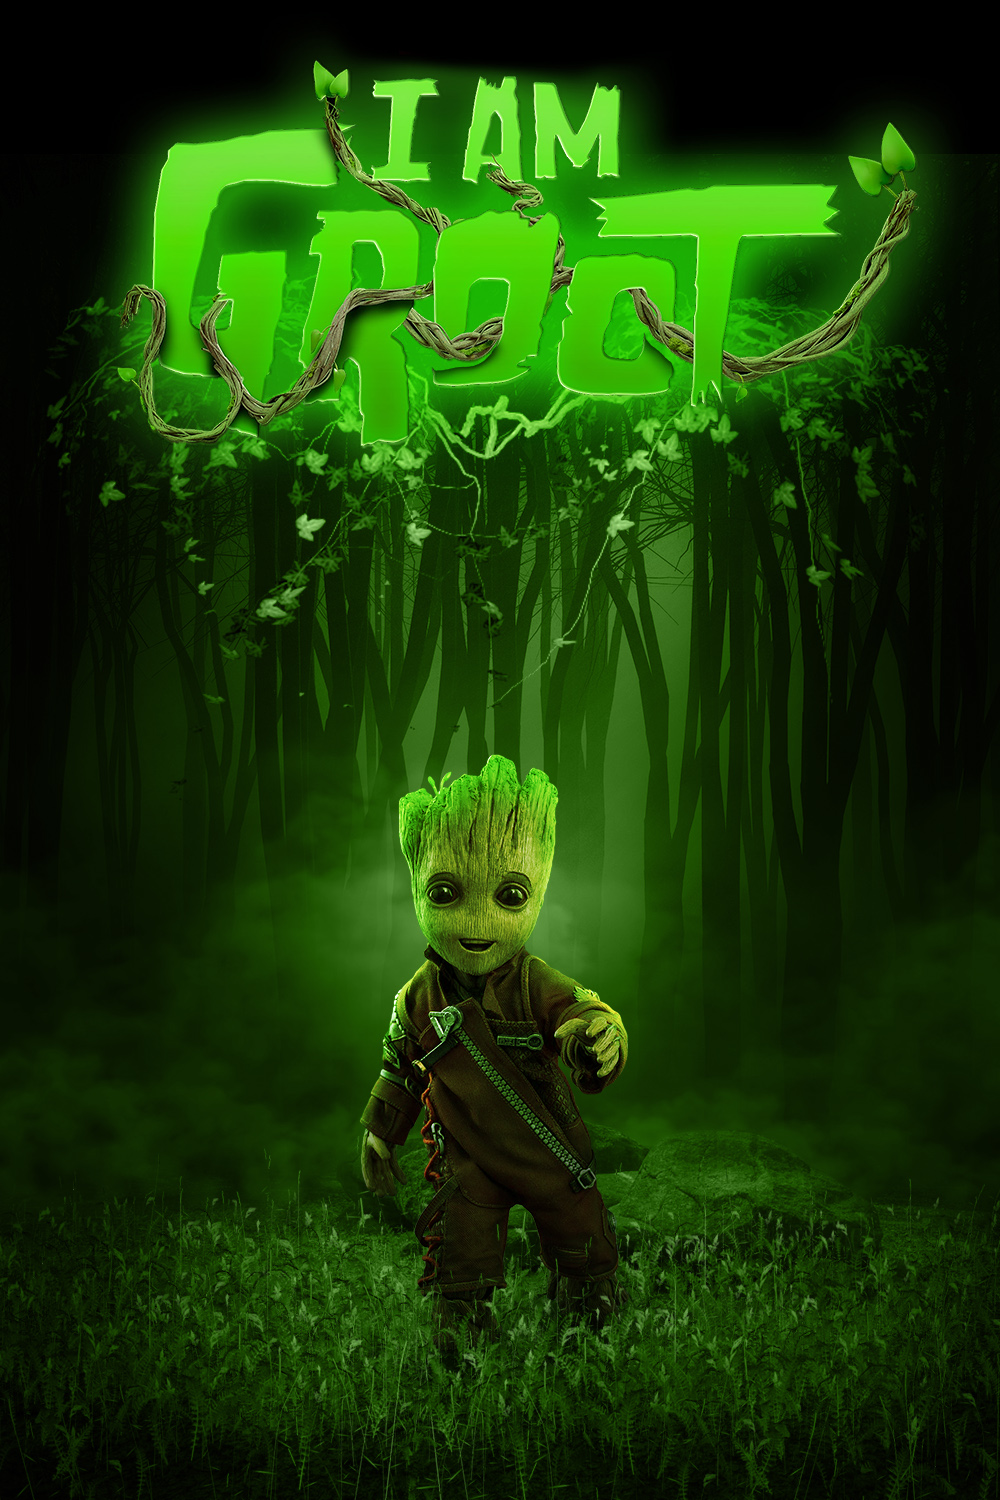 Groot photo manipulation pinterest preview image.